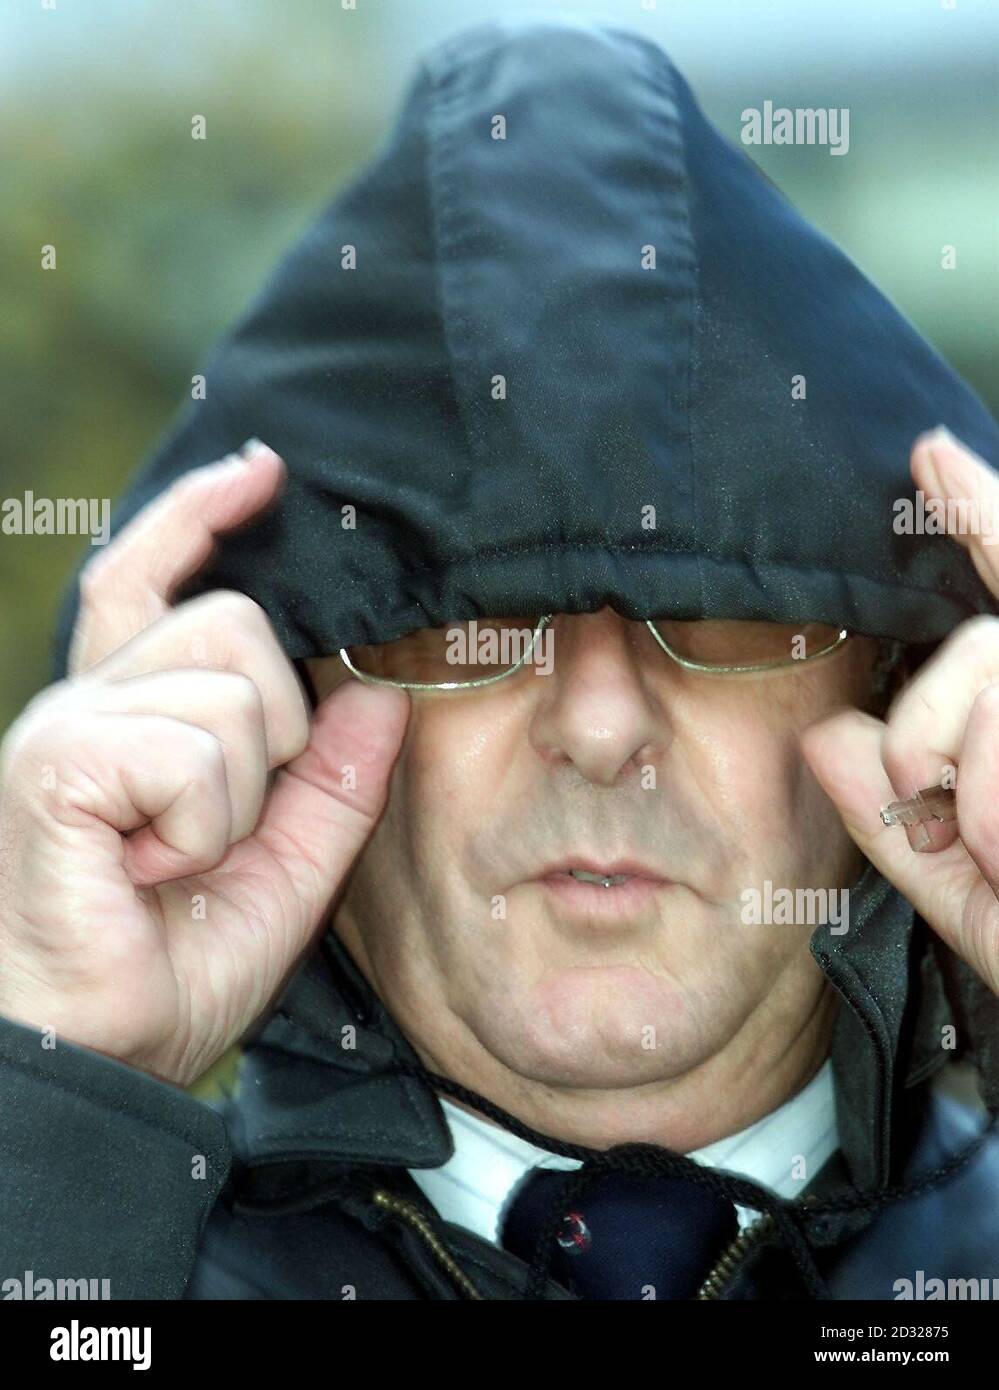 61-year-old Clive Rudd of Hunters Hill, Hawes Gayle, North Yorkshire, who allegedly posed as a teenager on an Internet chatroom before arranging a meeting with a 16-year-old girl and indecently assaulting her, arrives at Newcastle Crown Court.  * ....  for the start of his trial. Mr Rudd denies the offence which was alleged to have taken place in his car. Stock Photo